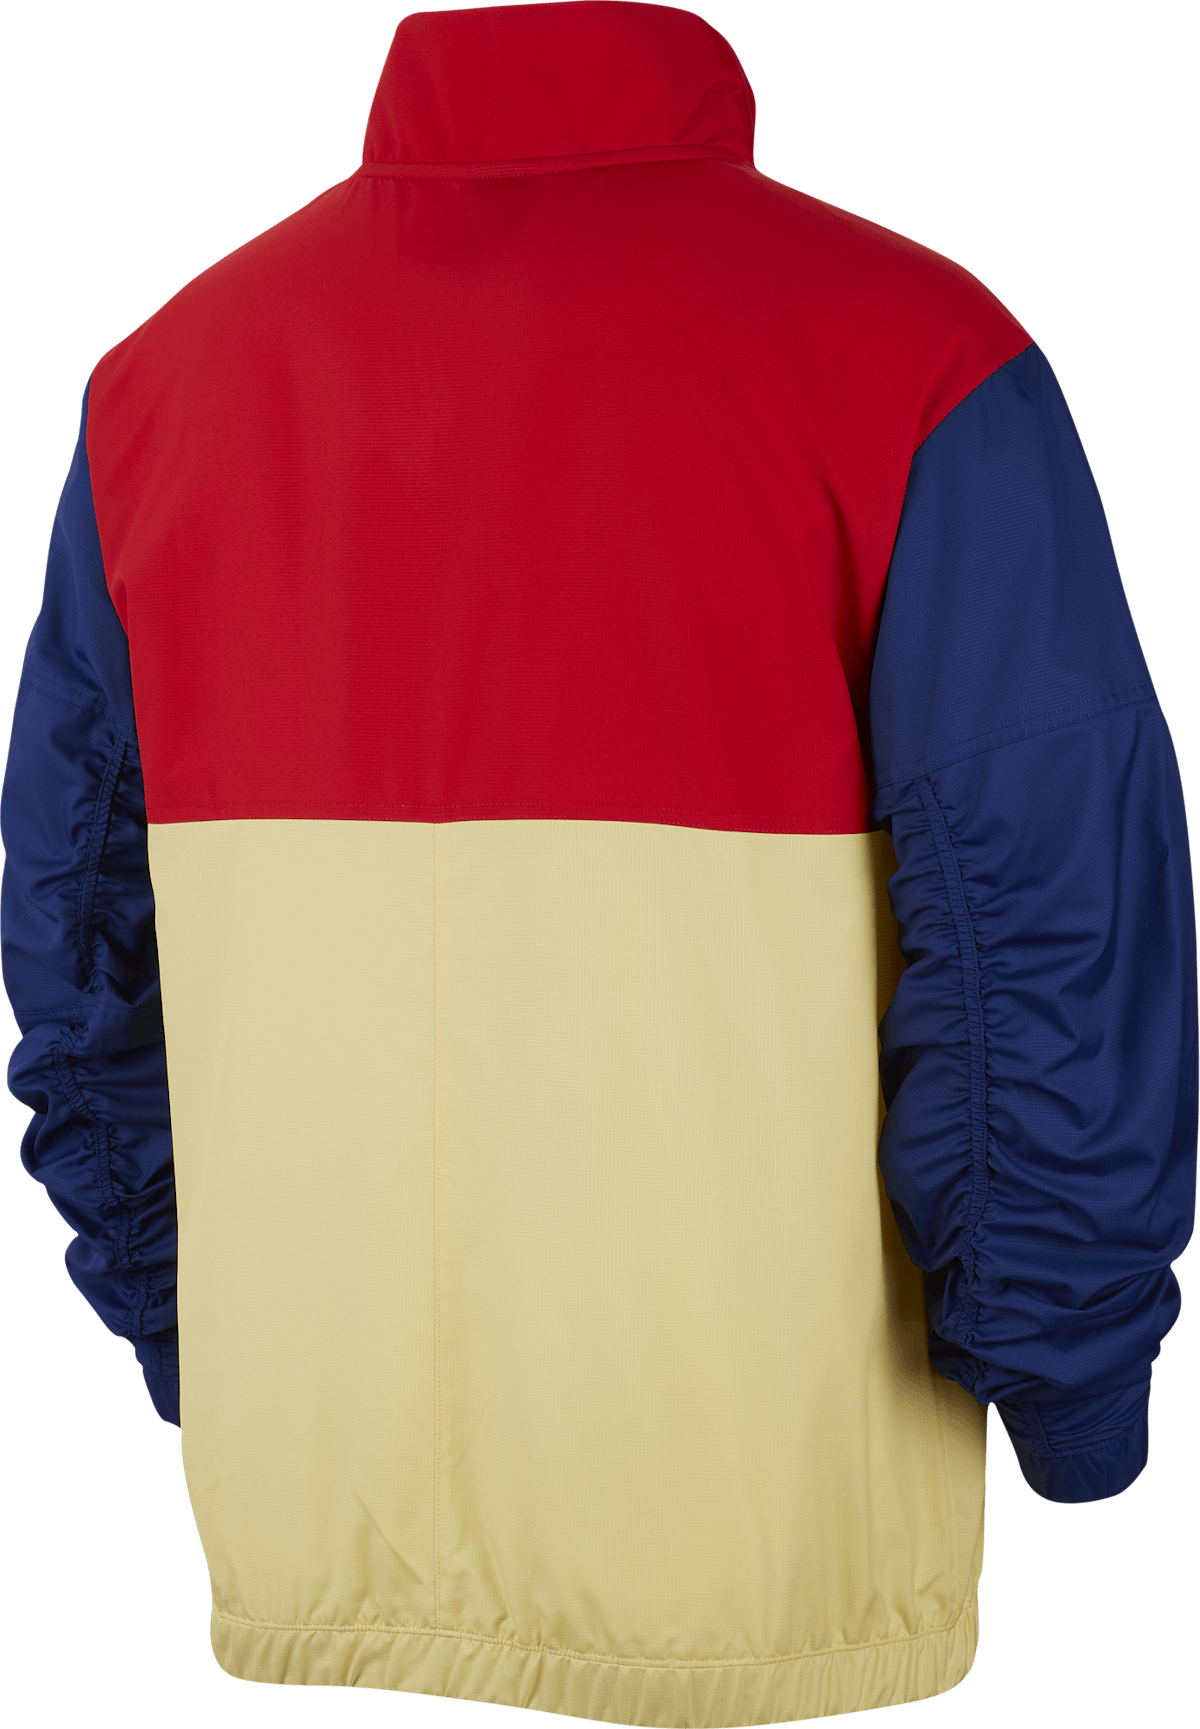 Kyrie Lightweight Jacket   Bicycle